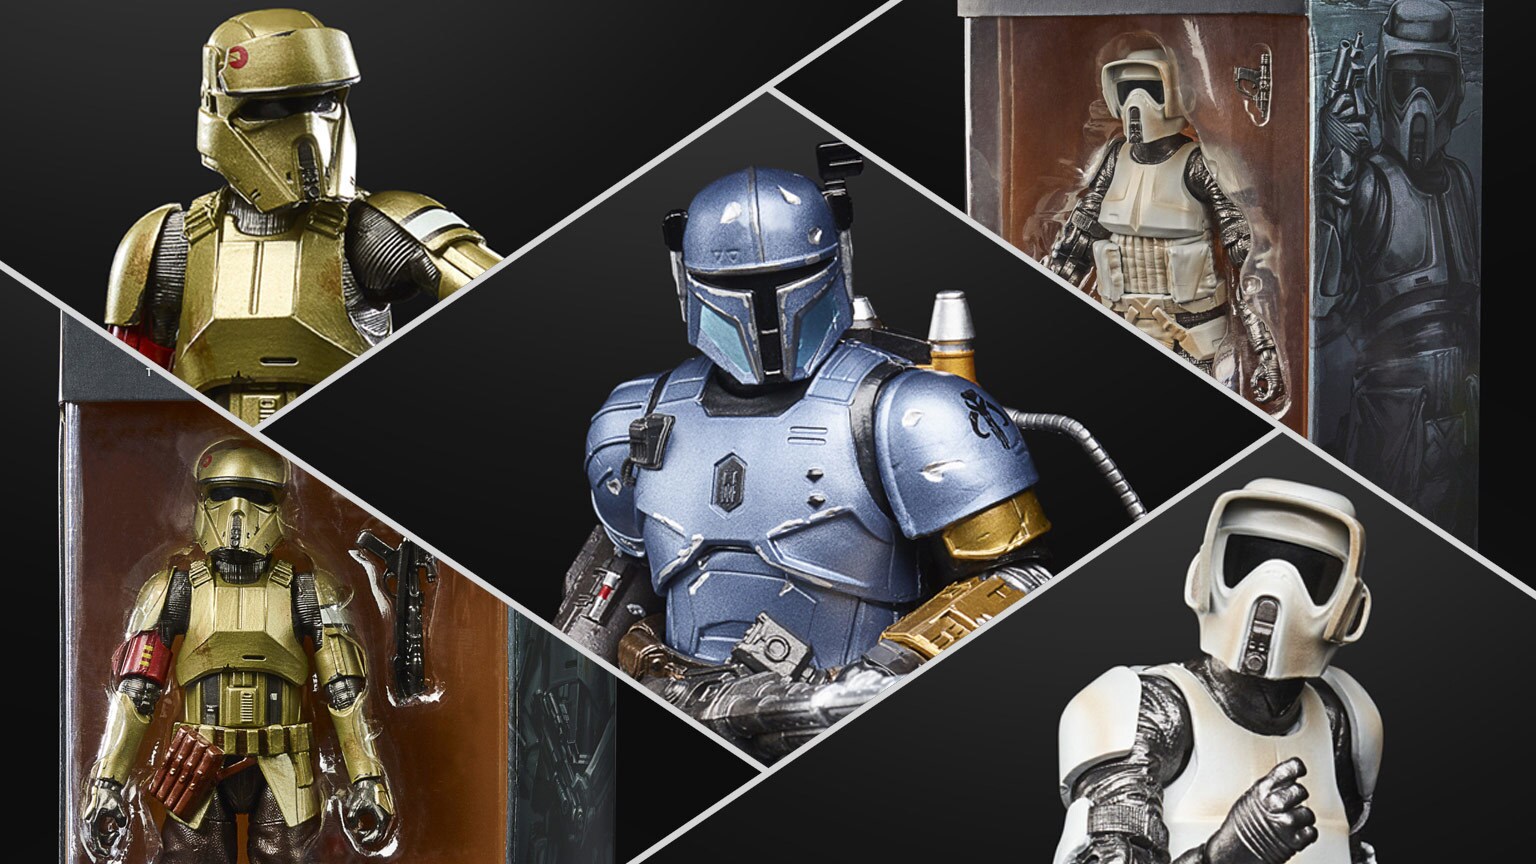 Hasbro Reveals New Carbonized Black Series Figures Inspired By The Mandalorian